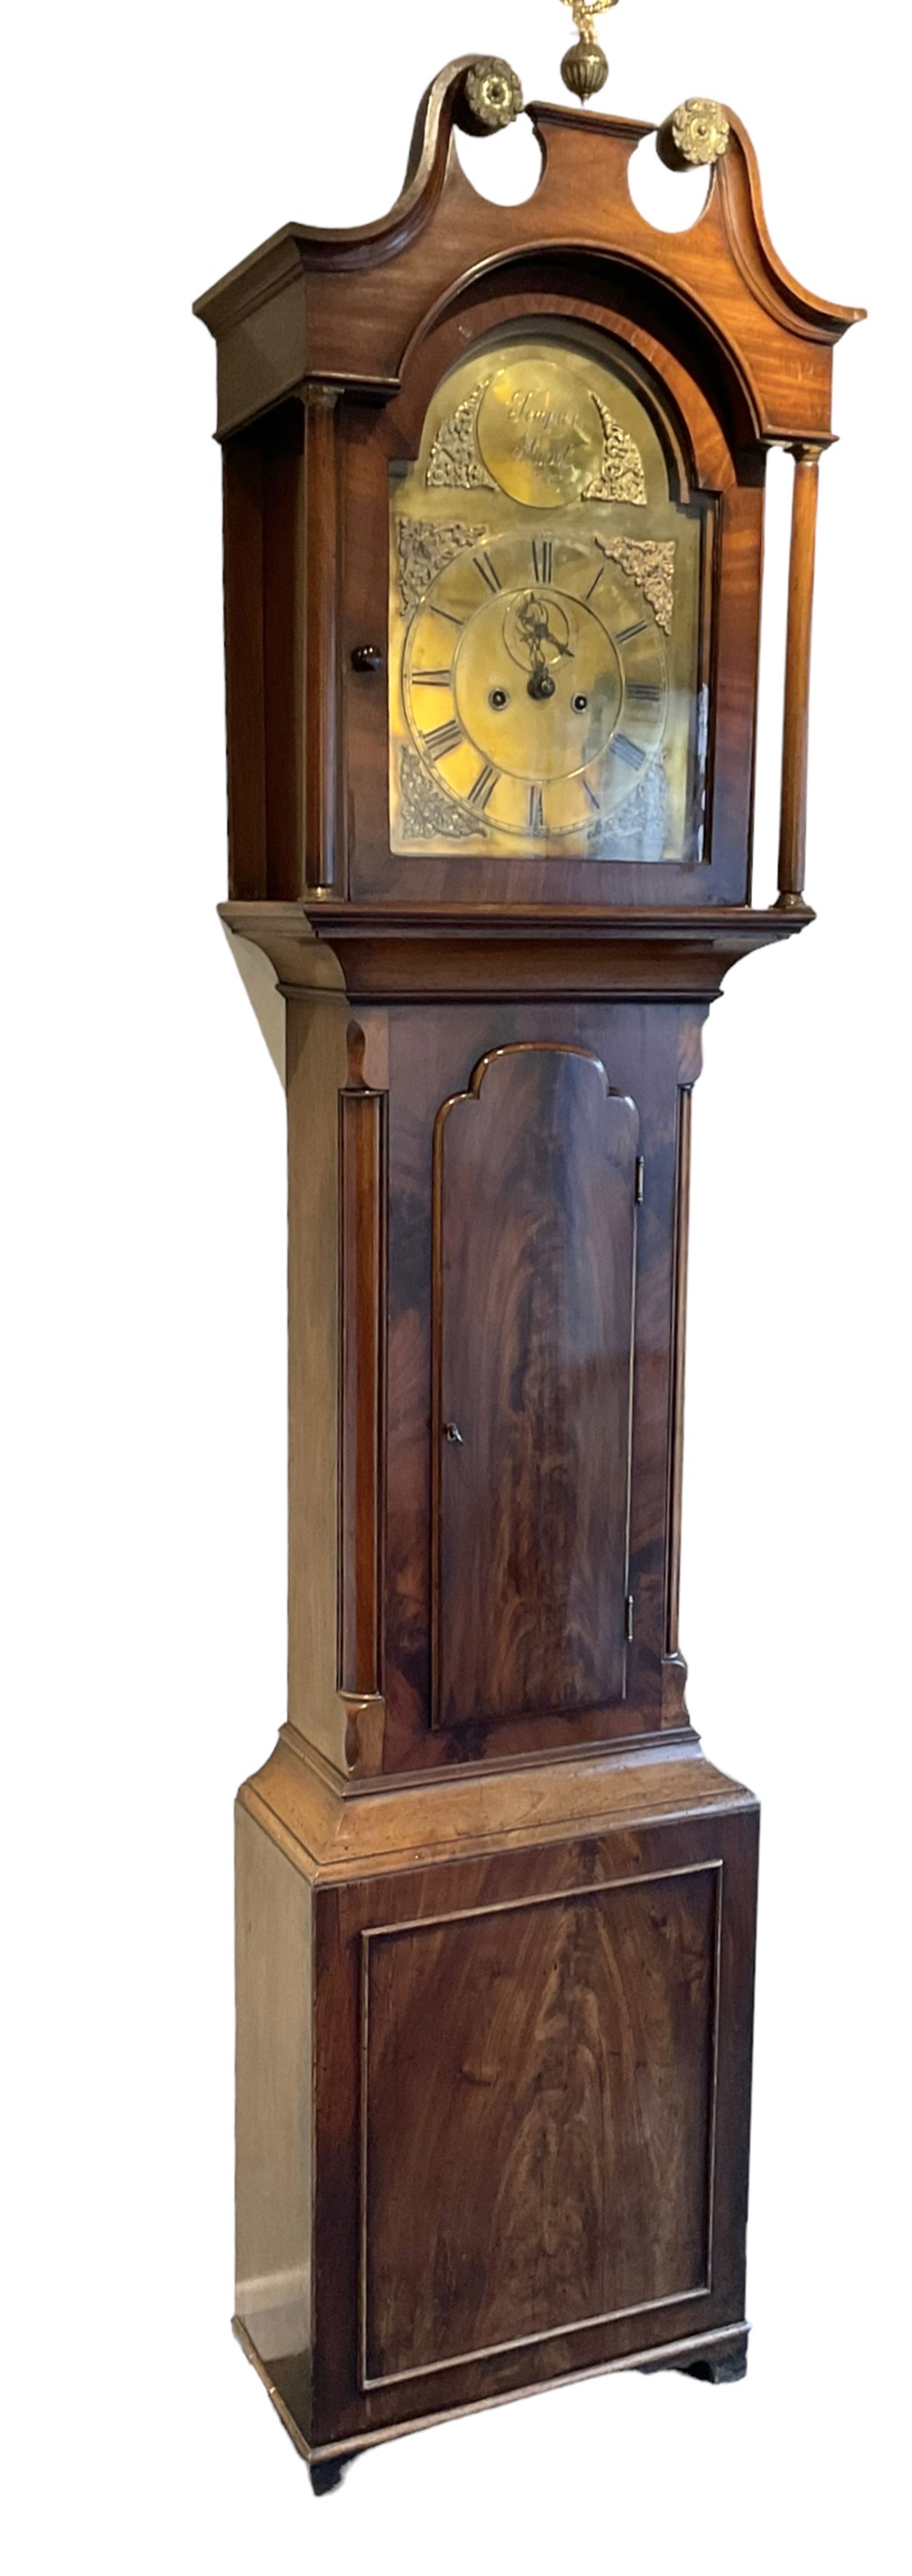 Mahogany - longcase clock with an eight day movement and brass dial - Image 8 of 12